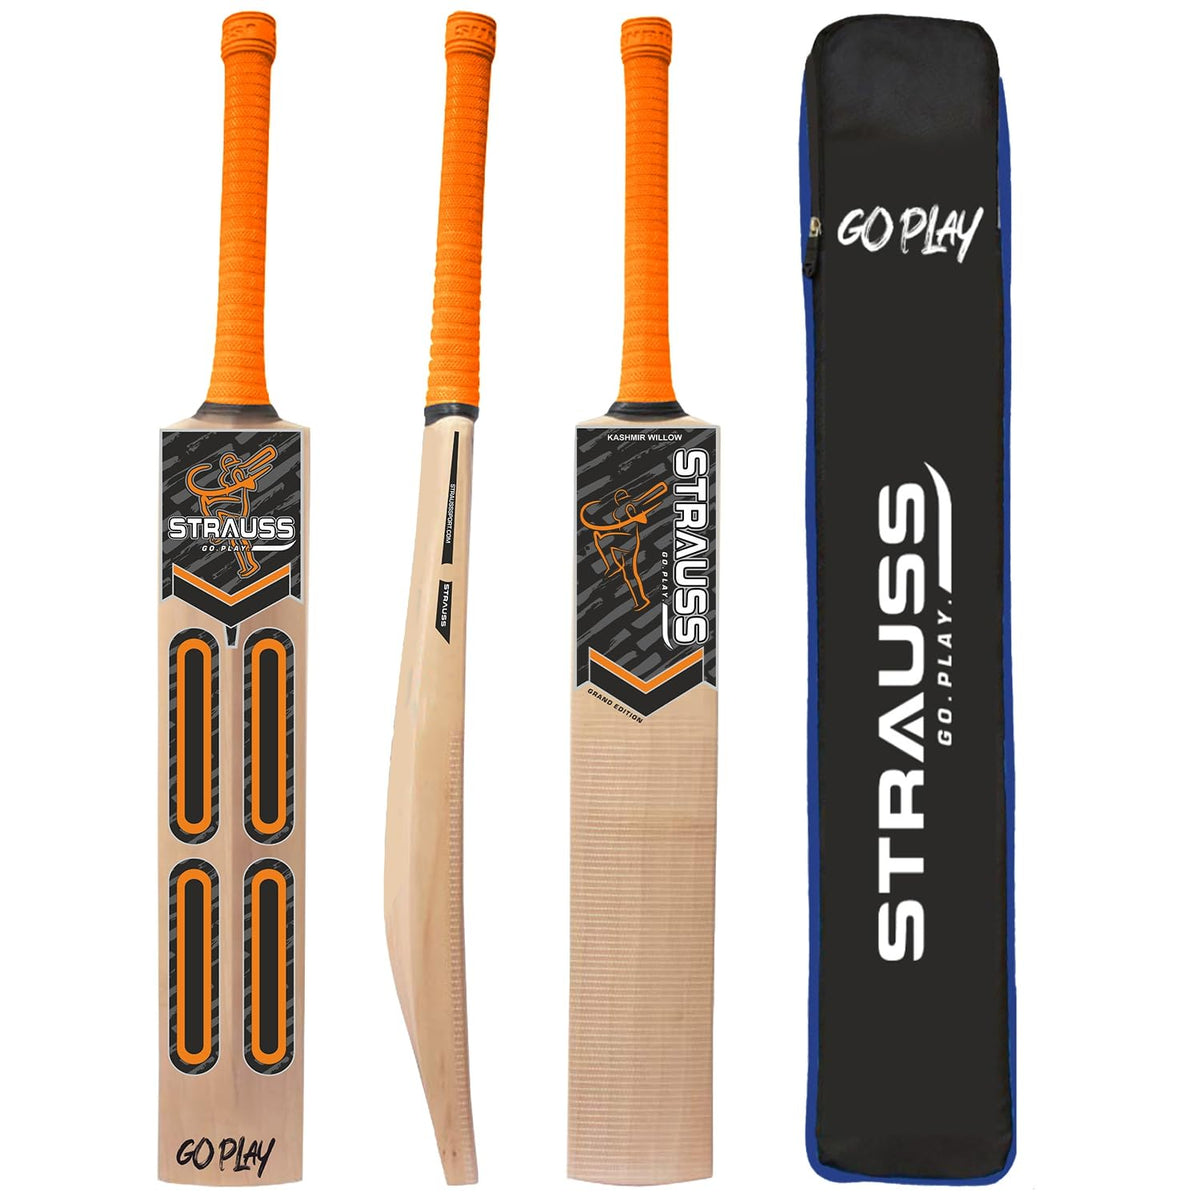 STRAUSS Grand Edition Kashmir Willow Scoop Cricket Bat |Size: Short Hand |Orange| Suitable for Tennis Ball|Ideal for Boys/Youth/Adults (900-1050 Grams)